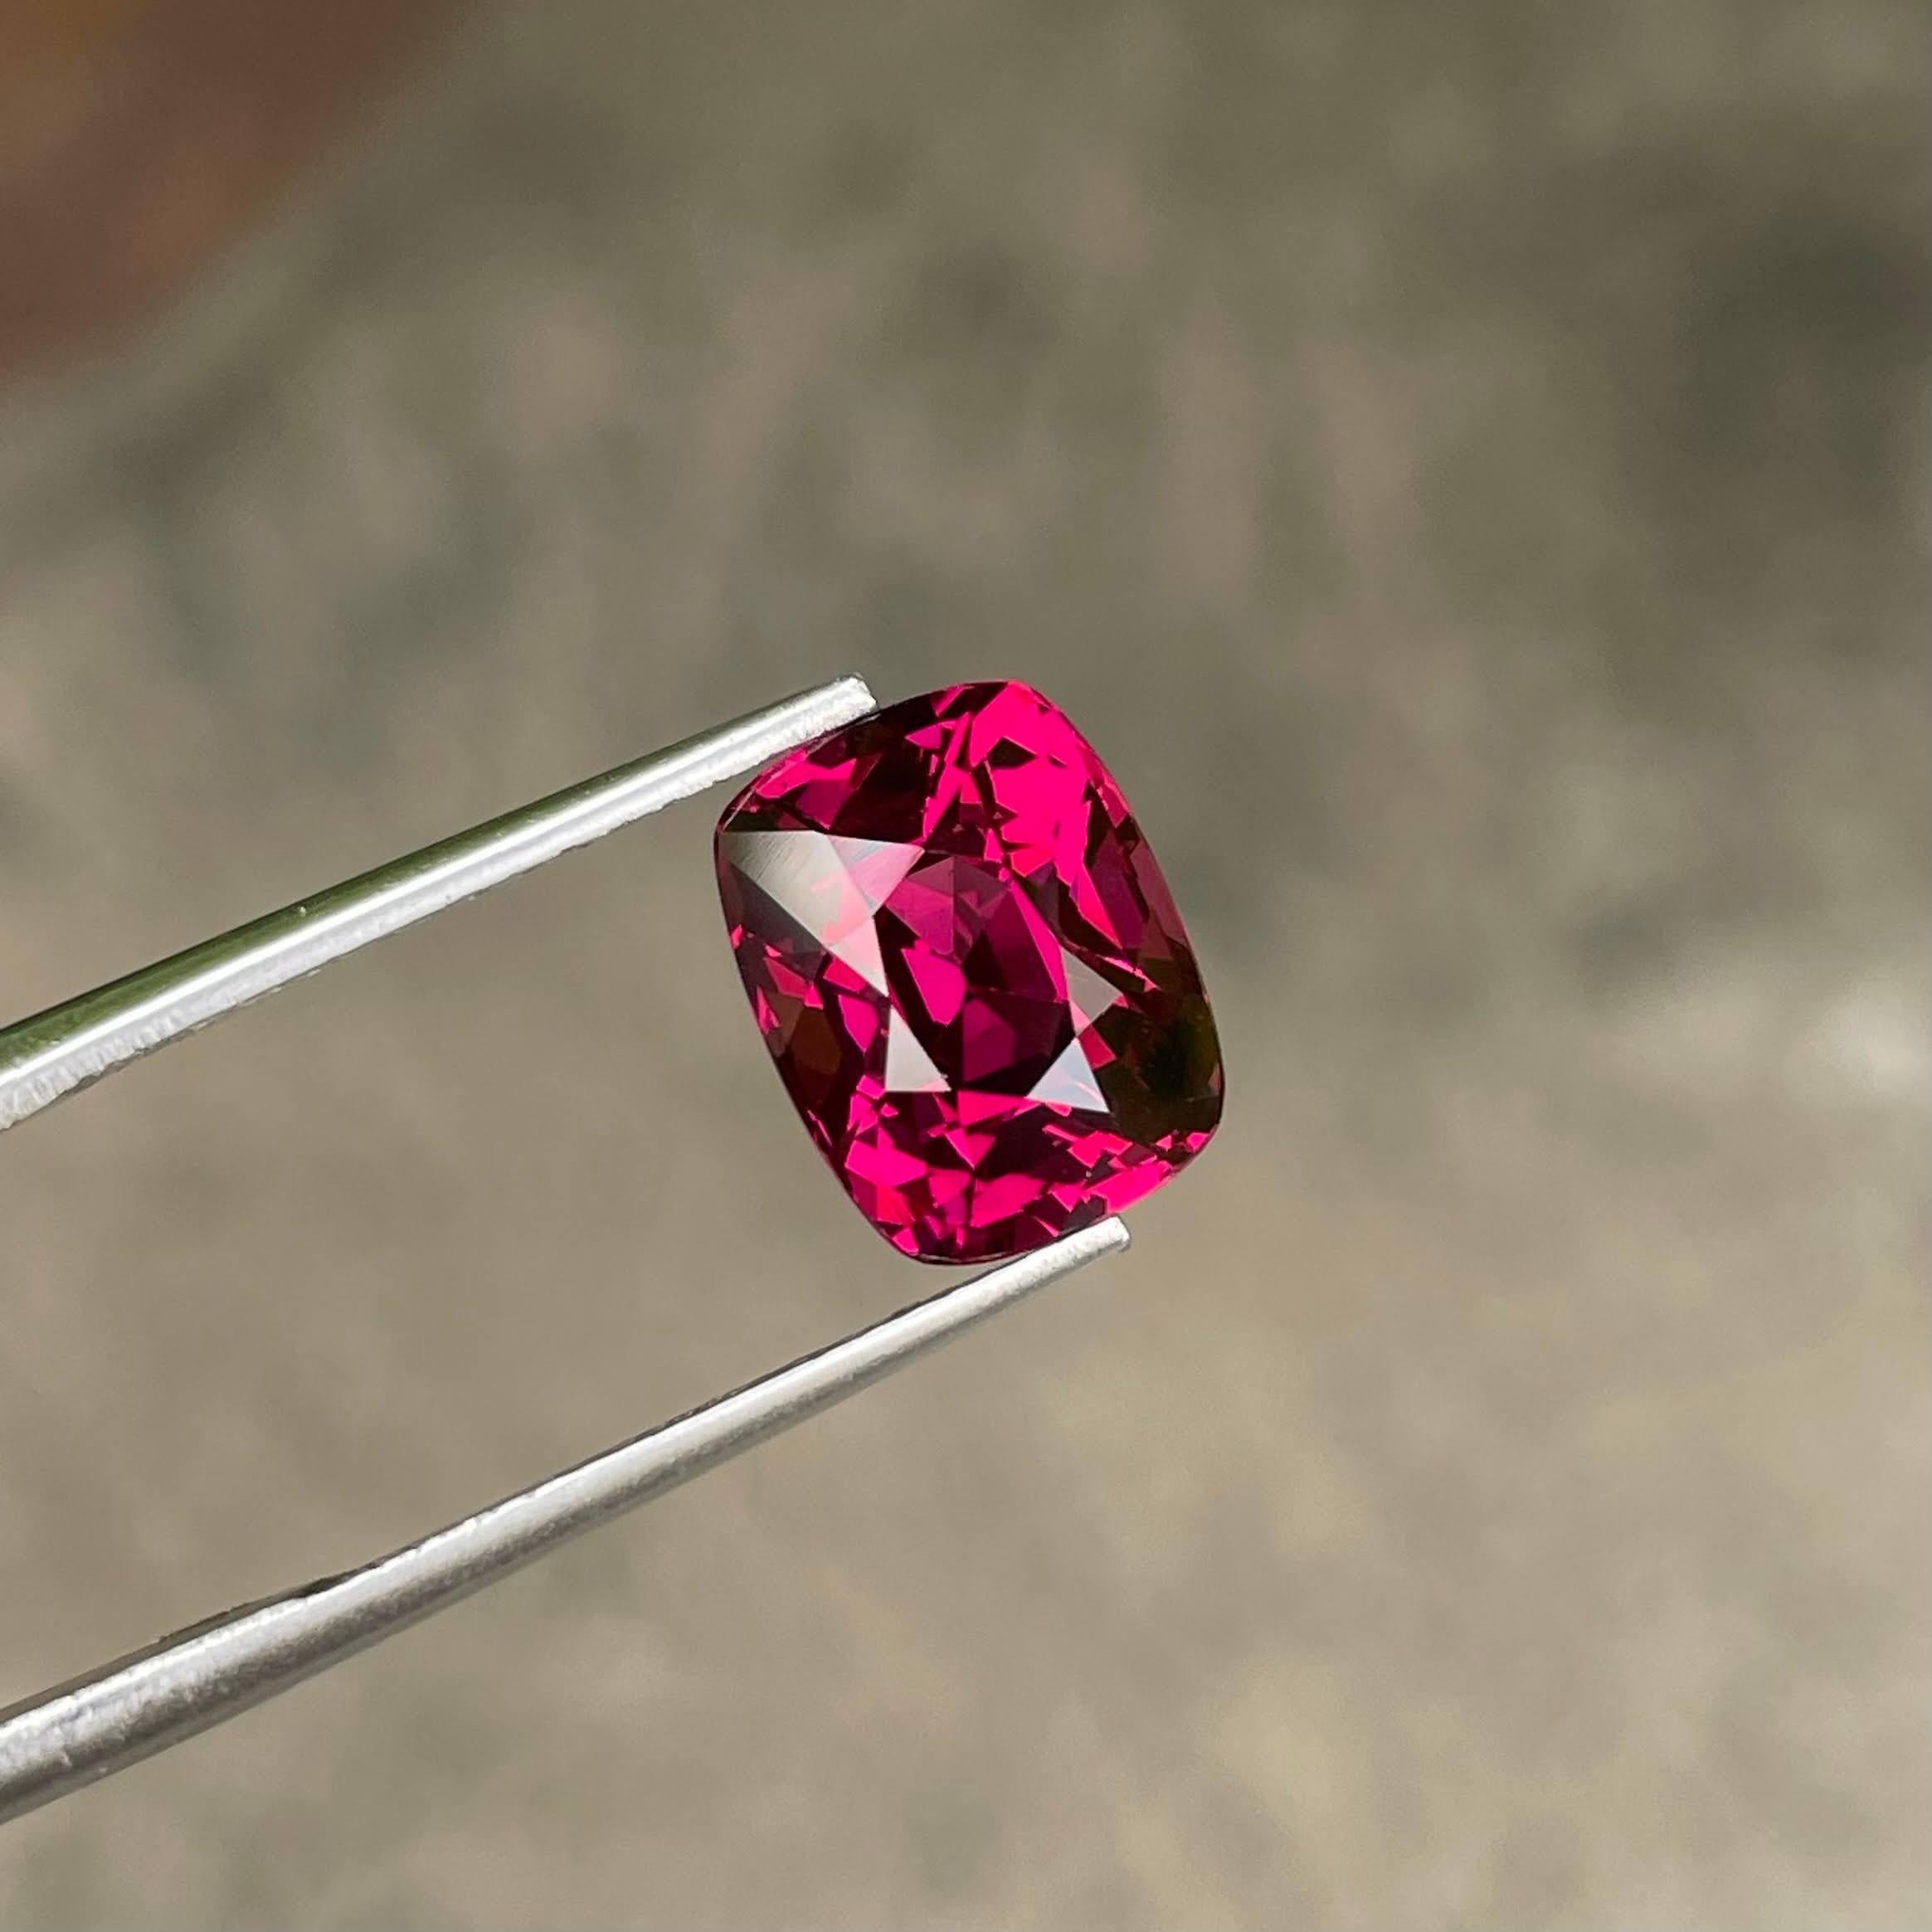 Weight 5.46 carats 
Dim 11.00x8.54x7.14 mm
Clarity Clean
Treatment None
Origin Tanzania
Shape Cushion
Cut Step Cushion





A radiant Reddish Pink Garnet, weighing an impressive 5.46 carats, takes center stage in this exquisite gemstone ensemble.